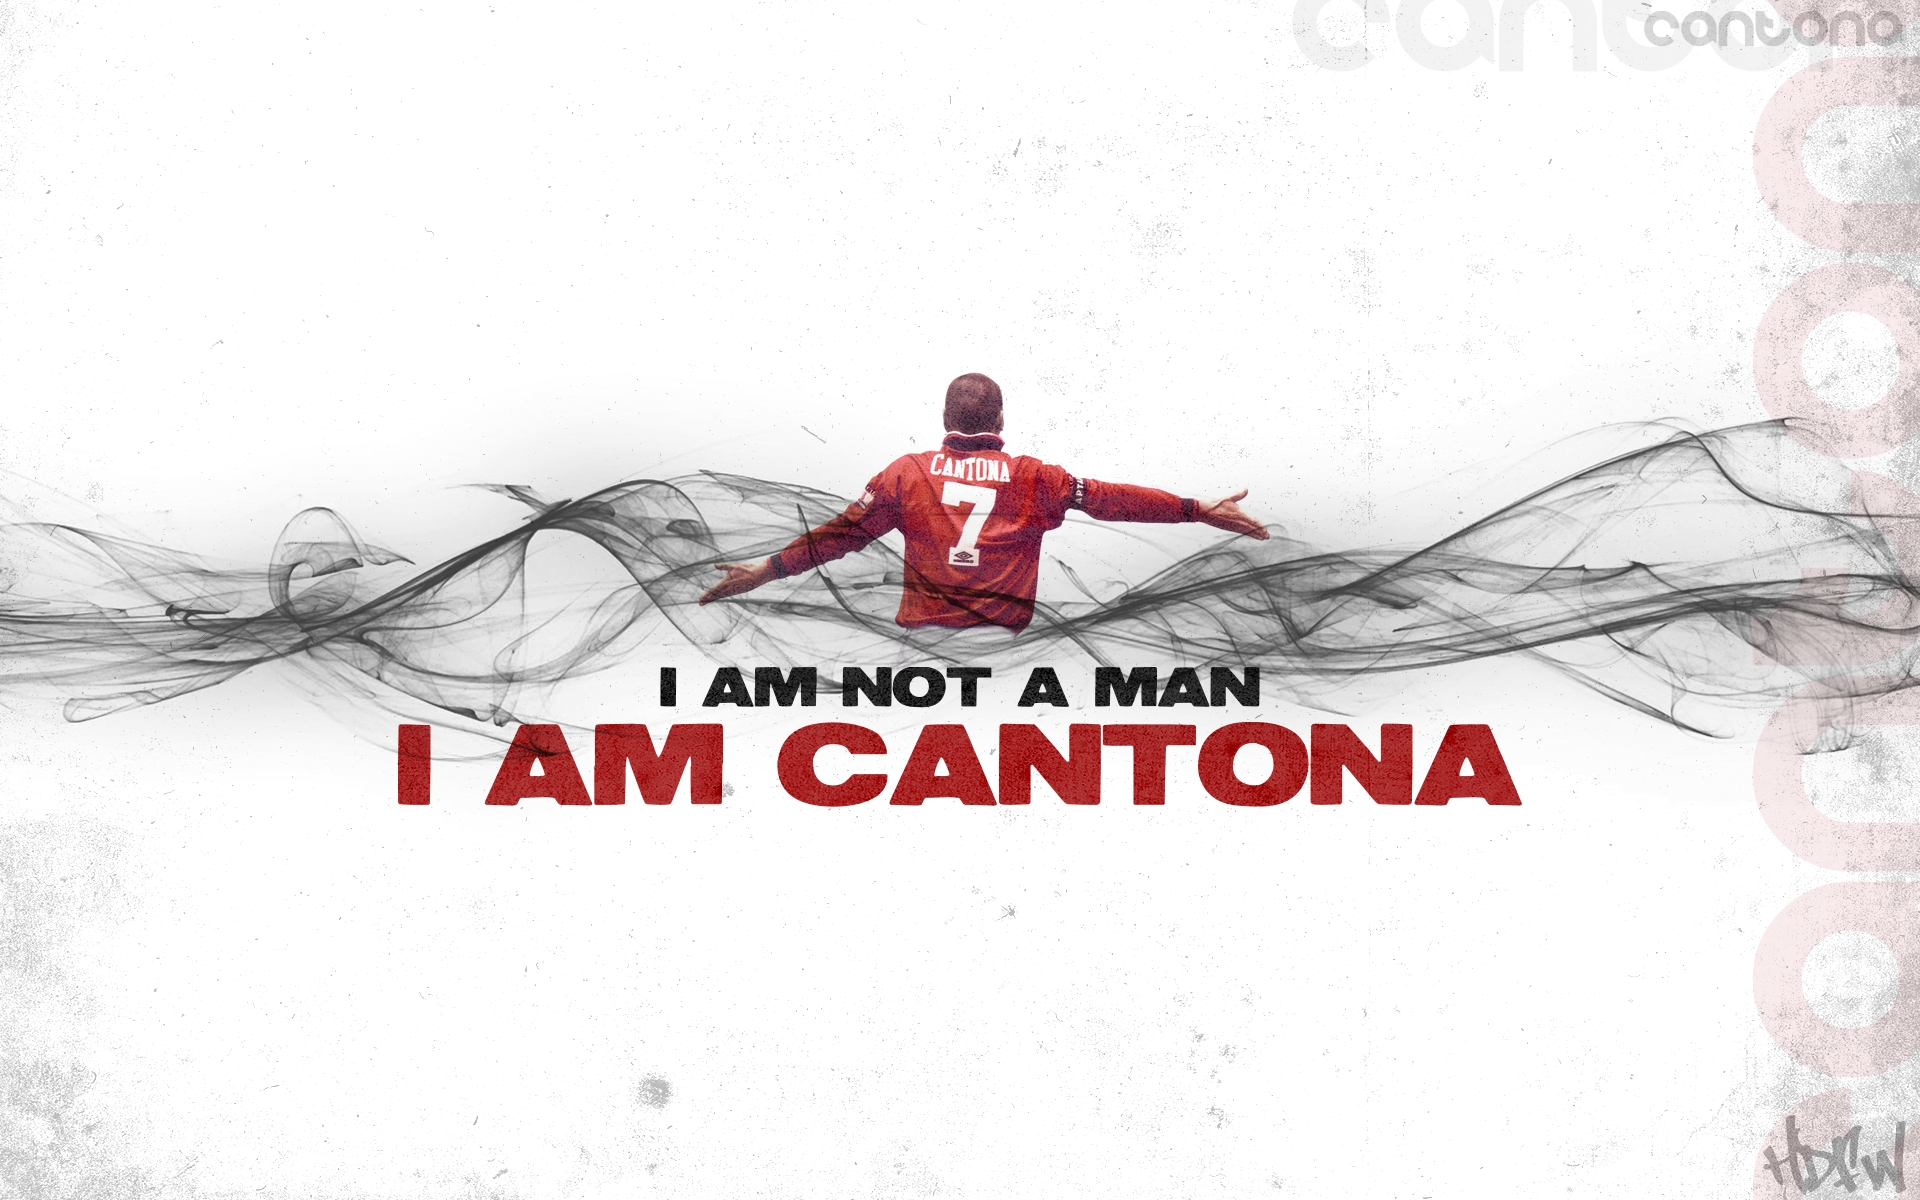 Cantona Projects  Photos videos logos illustrations and branding on  Behance